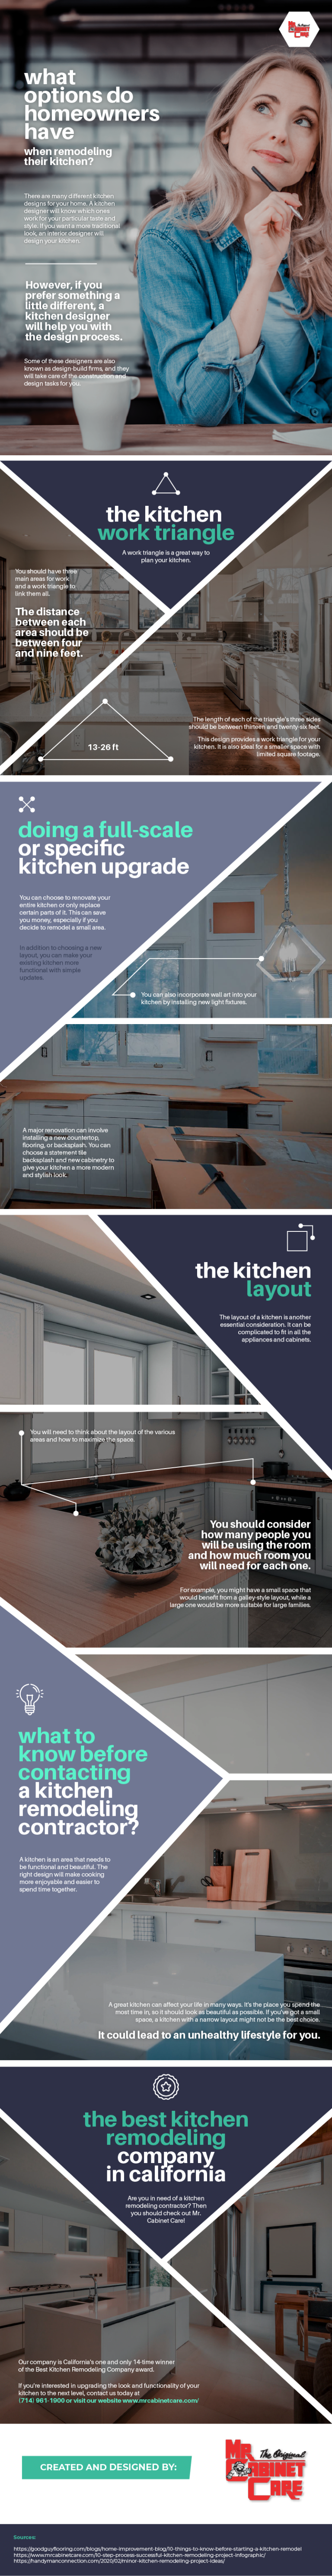 What_Options_Do_Homeowners_Have_When_Remodeling_Their_Kitchen_infographic_image_44